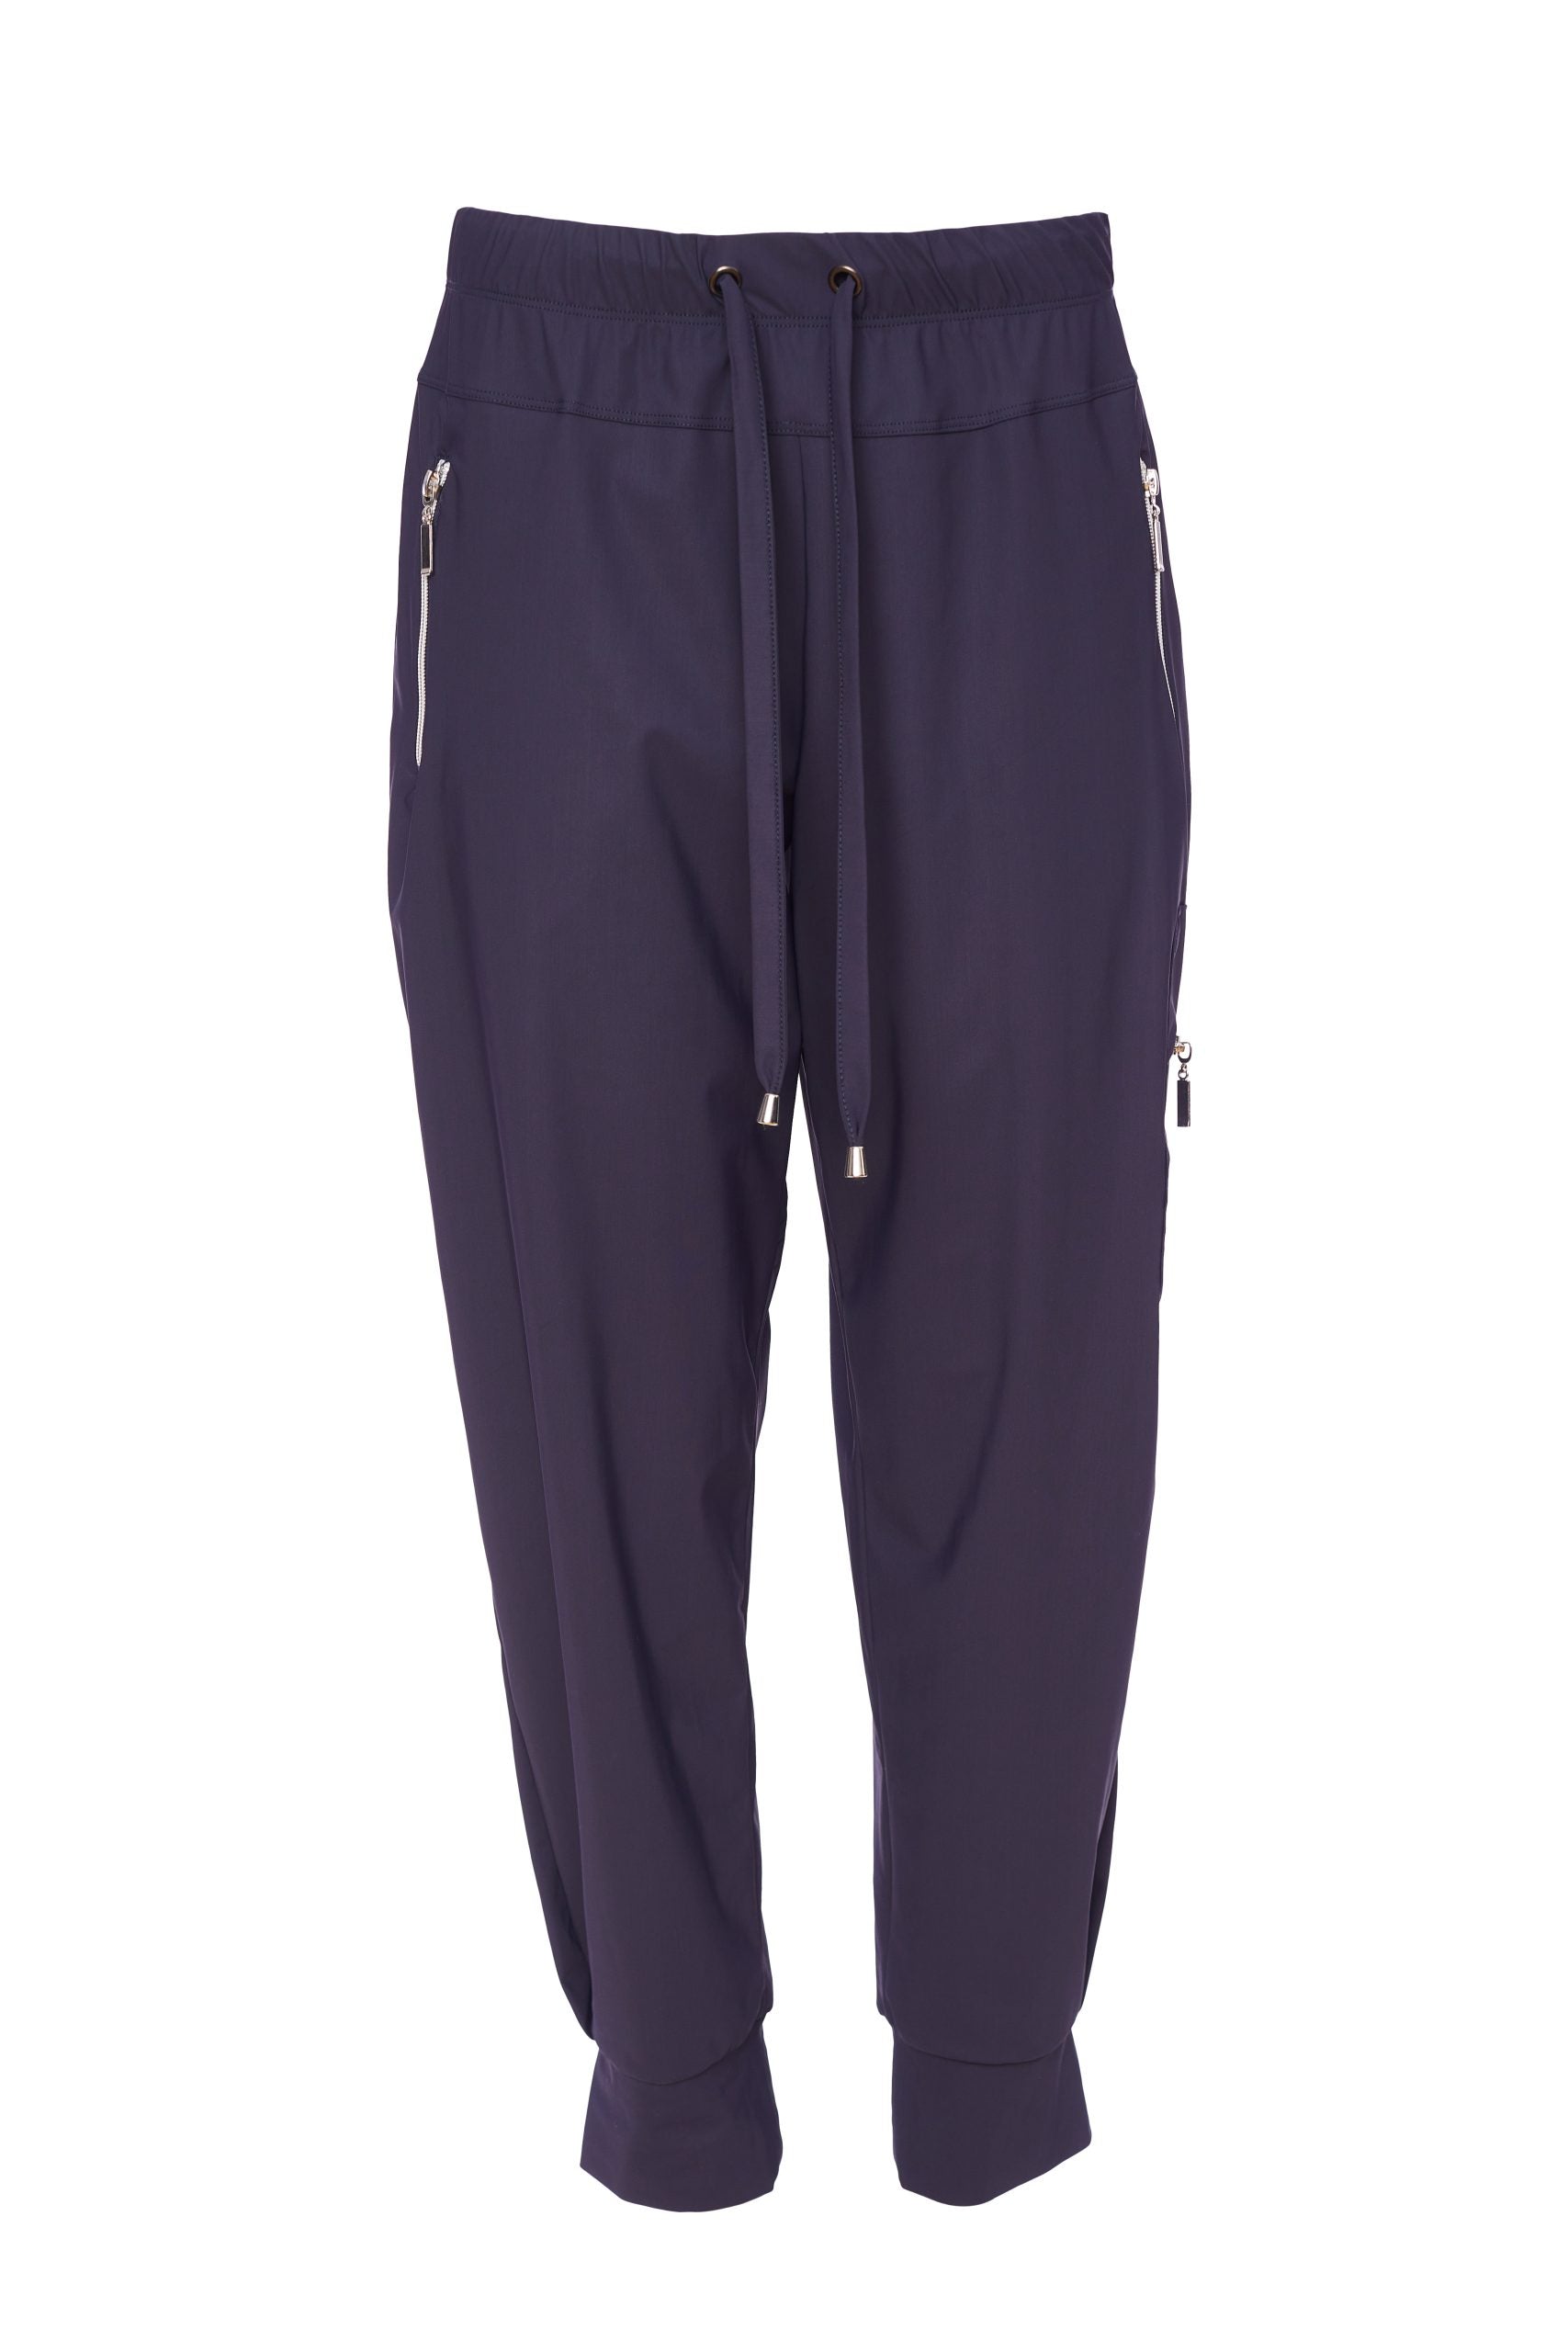 Cuff Trouser with Side Pocket/Zip in Mink (Image in Navy)